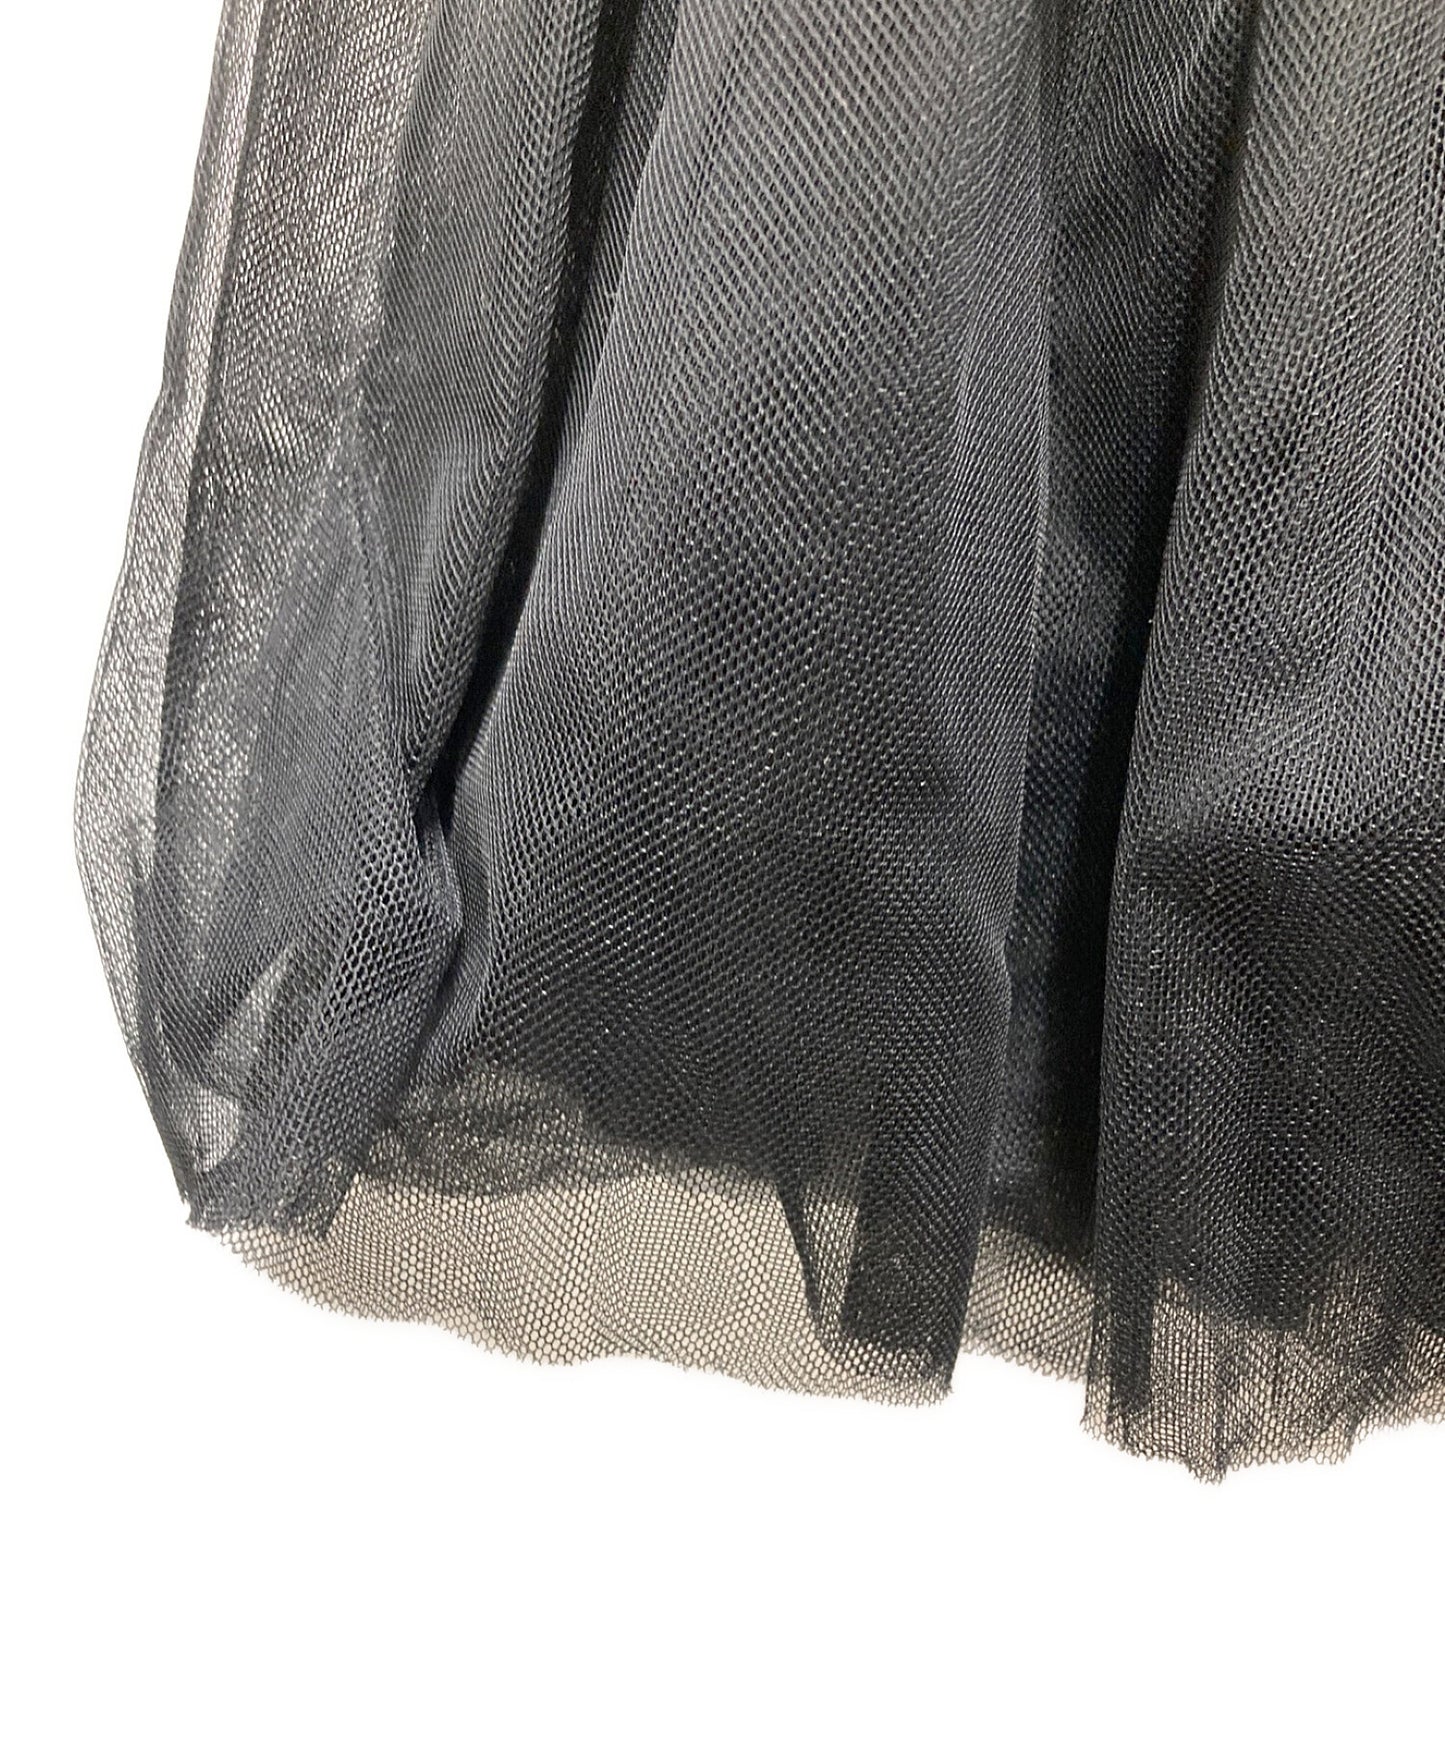 [Pre-owned] COMME des GARCONS GIRL Voluminous Tulle Skirt NG-S013